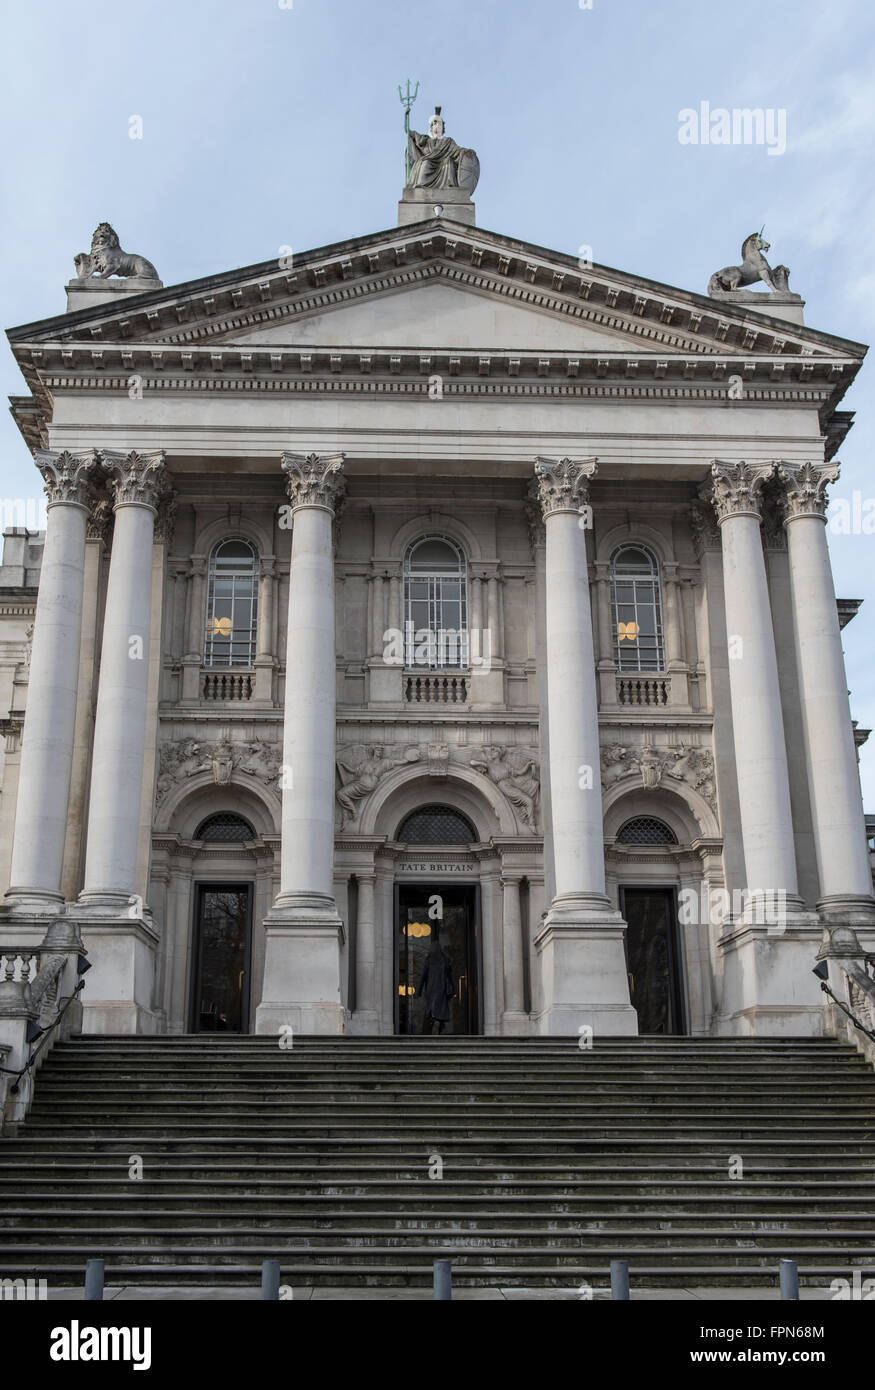 Facade of the Tate Britain art gallery in Westminster, London. Stock Photo